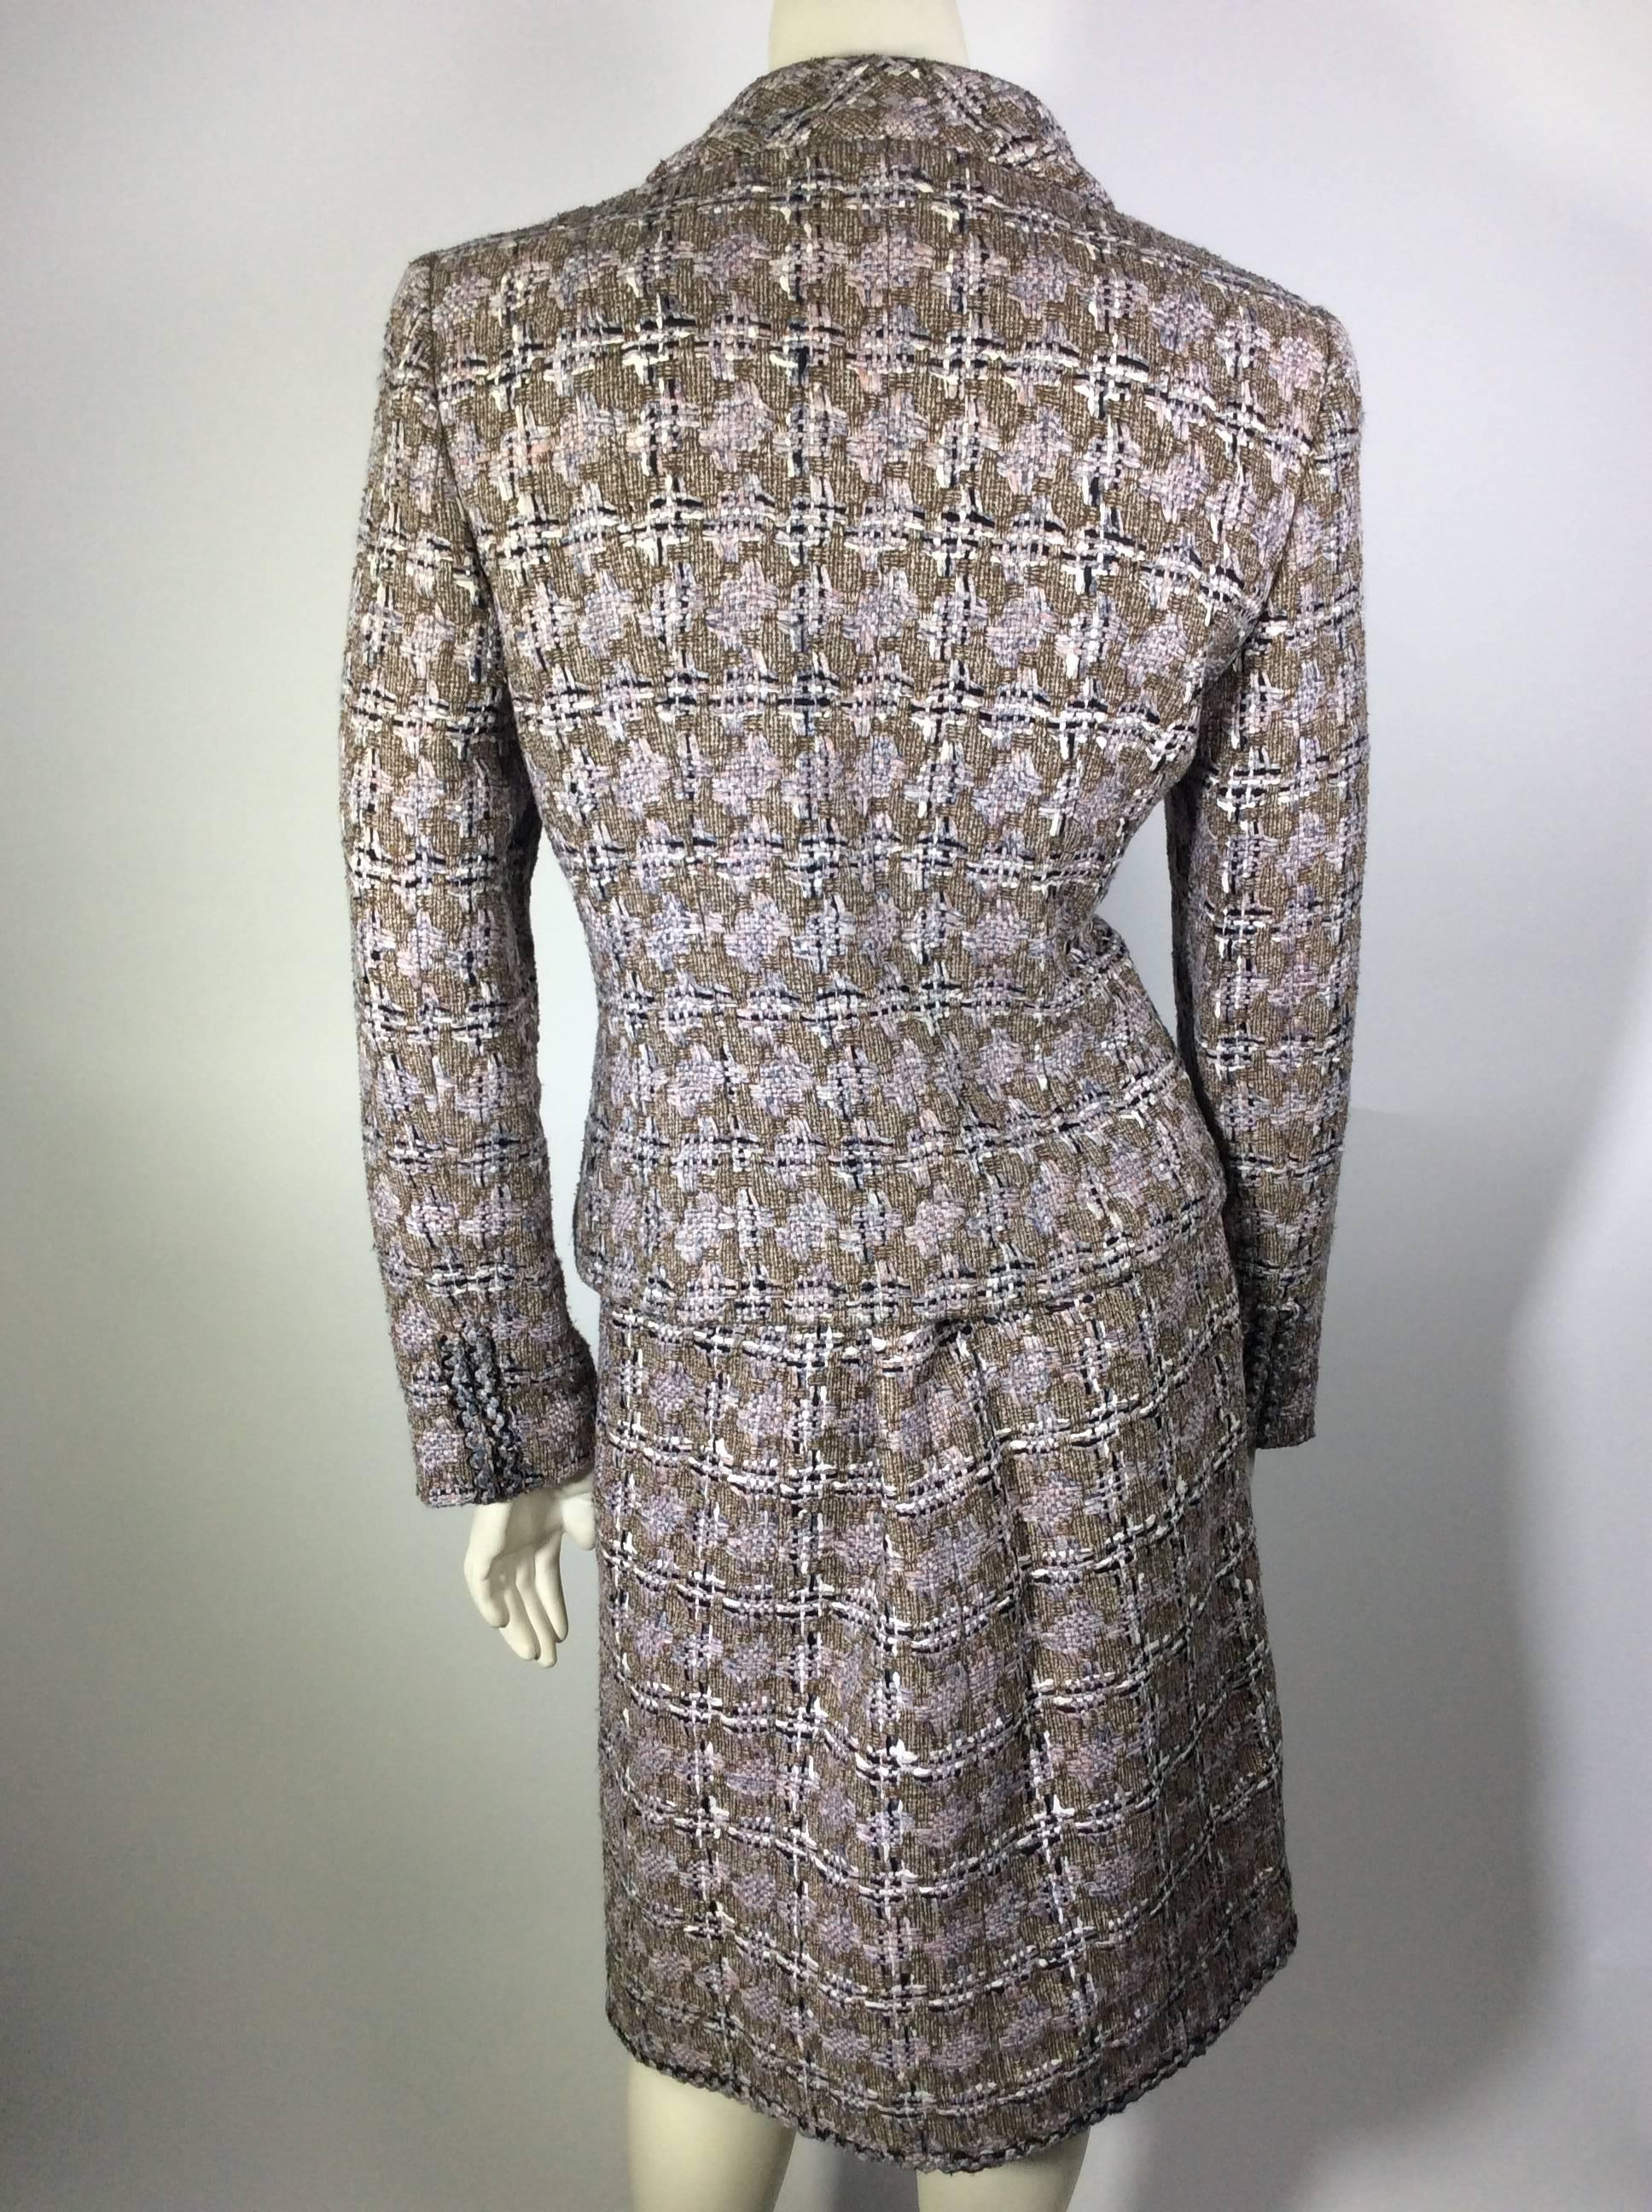 HOLIDAY FLASH SALE! 50% Off! Chanel Spring 2003 Lavender and Brown Tweed Suit In Excellent Condition For Sale In Narberth, PA